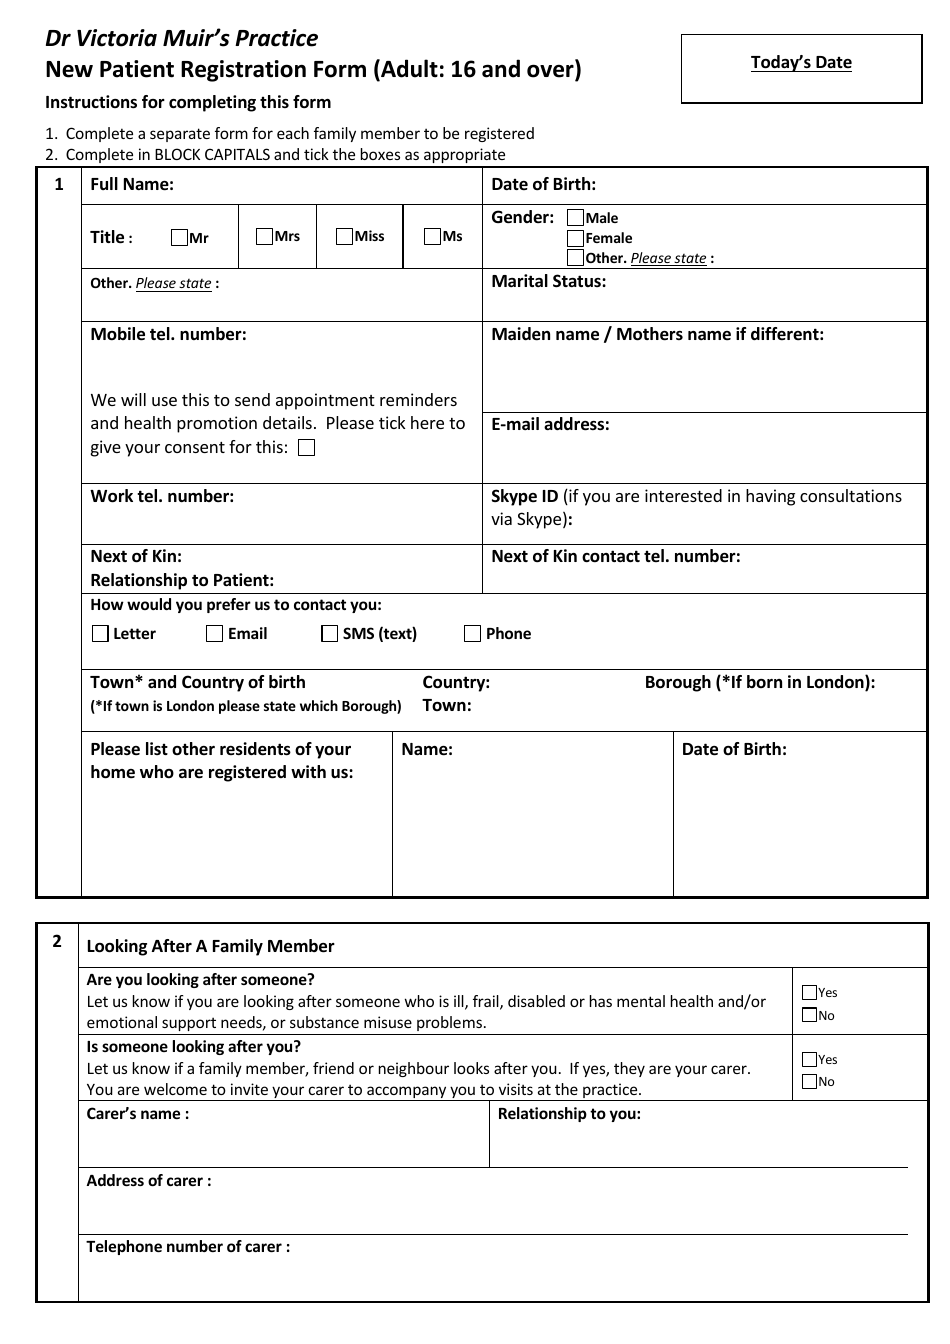 New Patient Registration Form (Adult: 16 and Over) - Dr Victoria Muirs Practice, Page 1